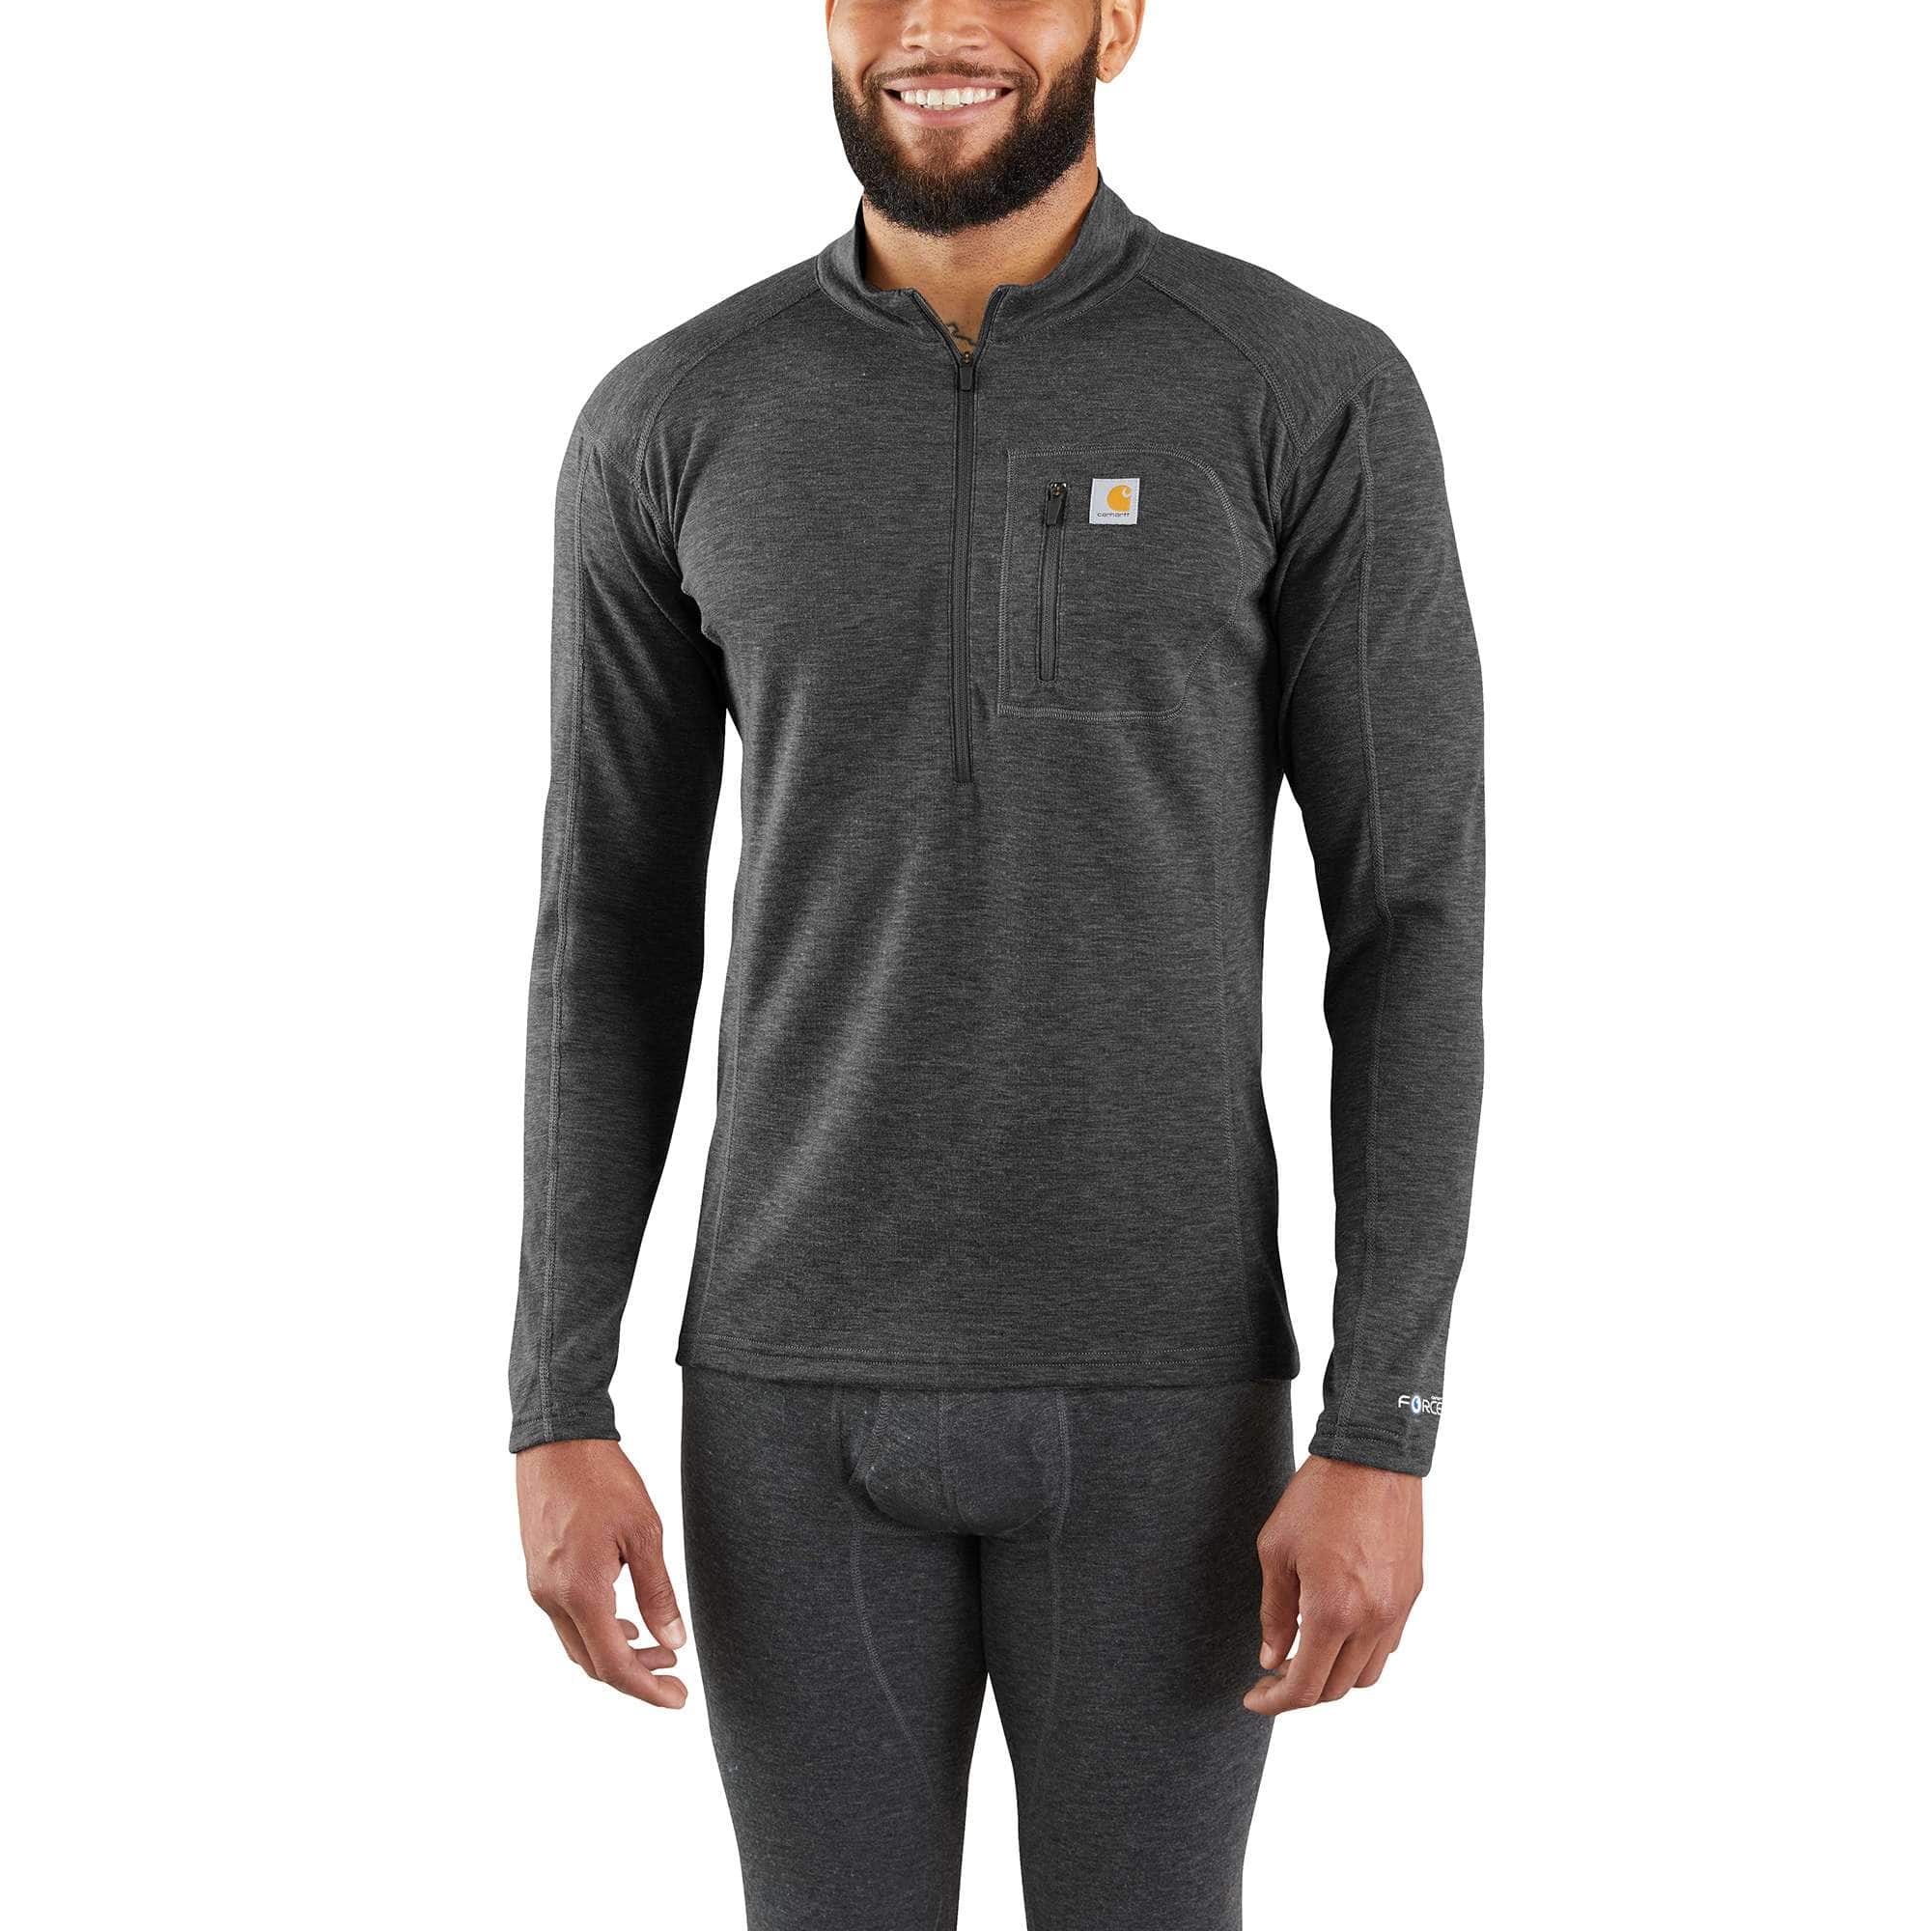 Women's Base Layer Quarter-Zip Thermal Top - Carhartt Force® - Midweight -  Poly-Wool